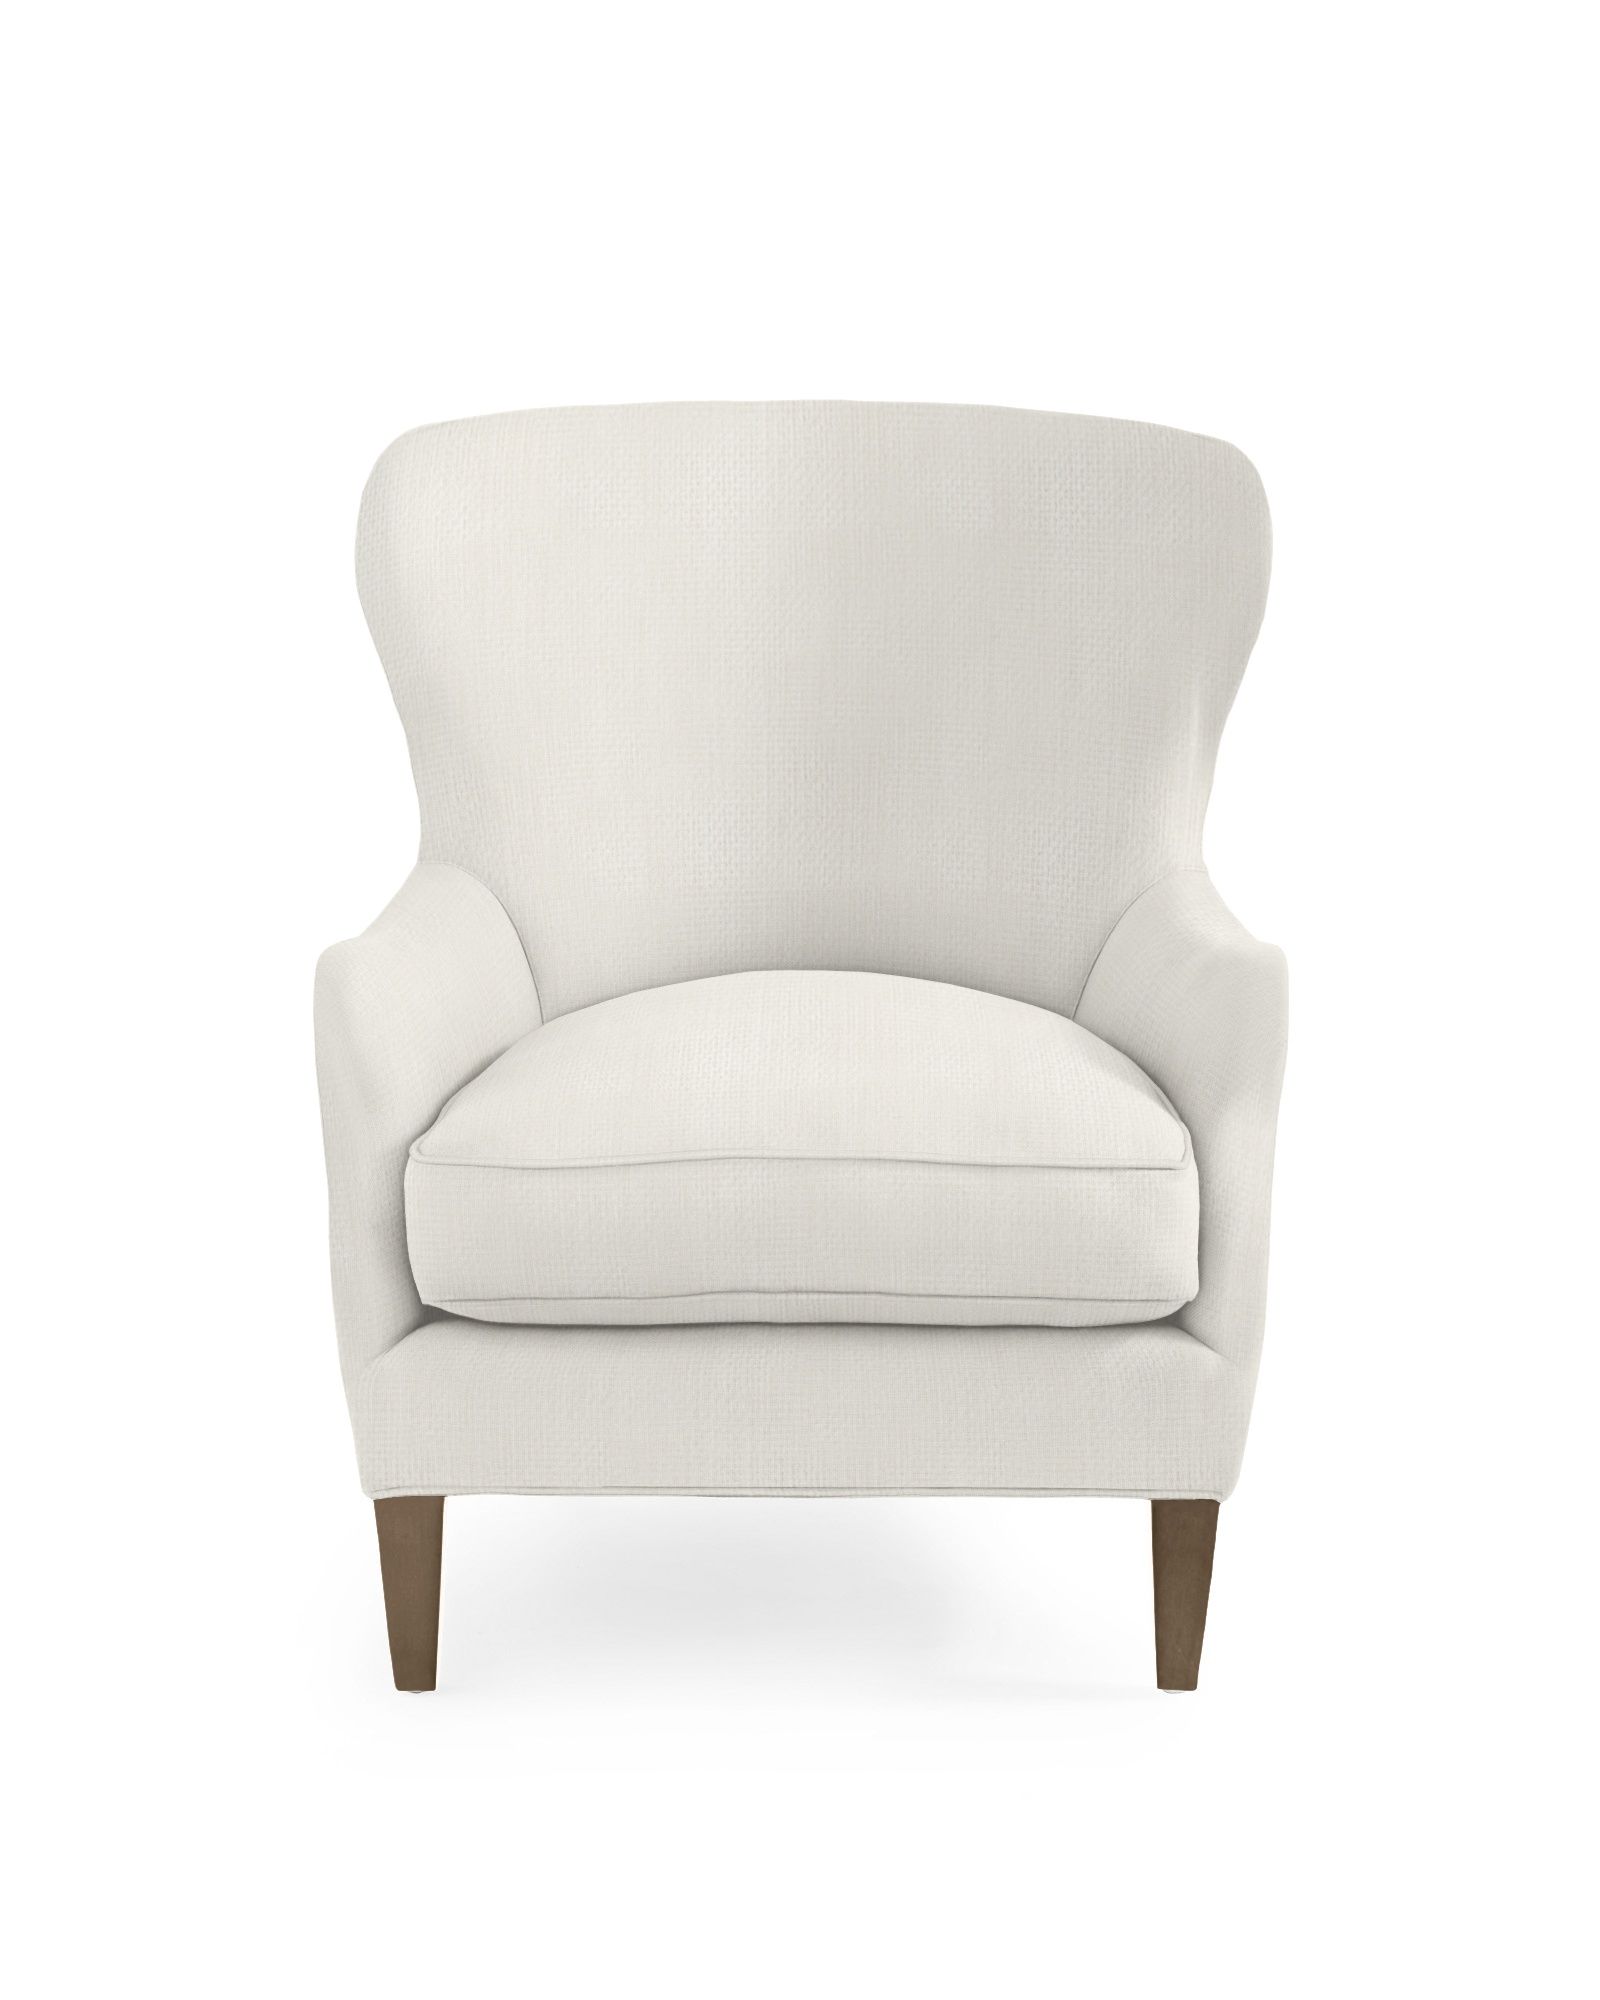 Thompson Wing Chair | Serena and Lily